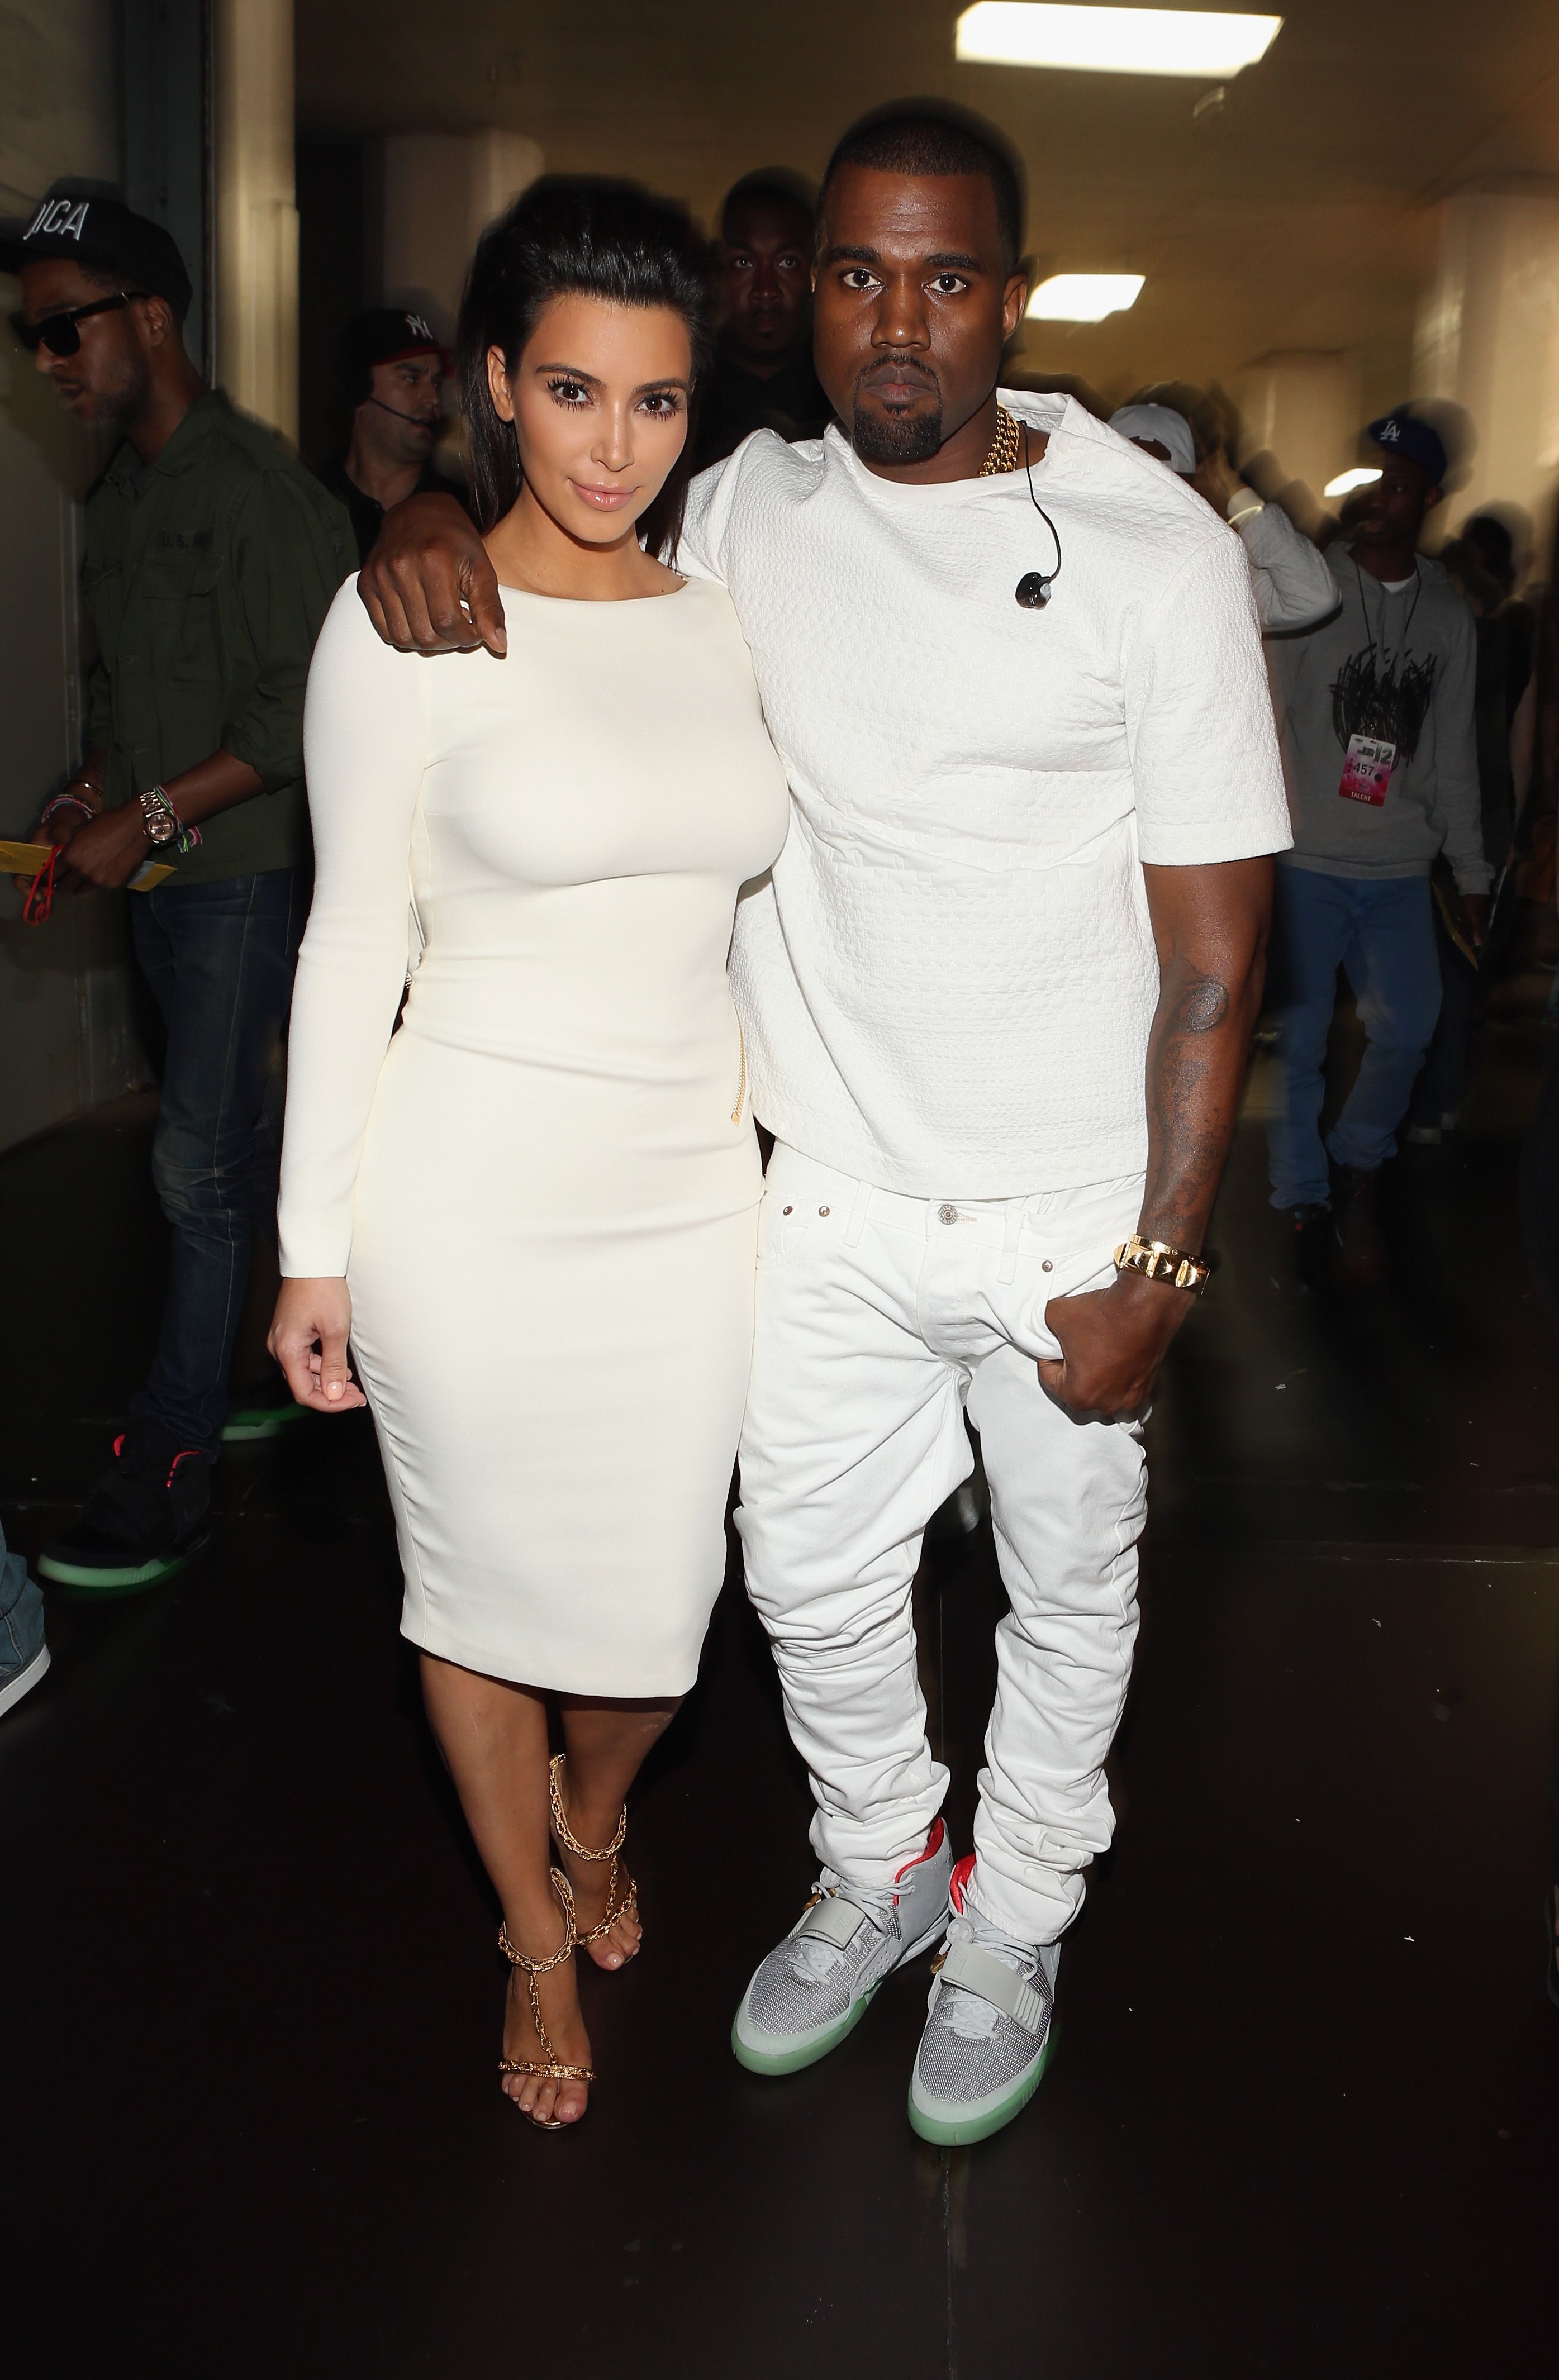 Kim Kardashian and Kanye West at the BET Awards held at The Shrine Auditorium on July 1, 2012. | Photo:Getty Images